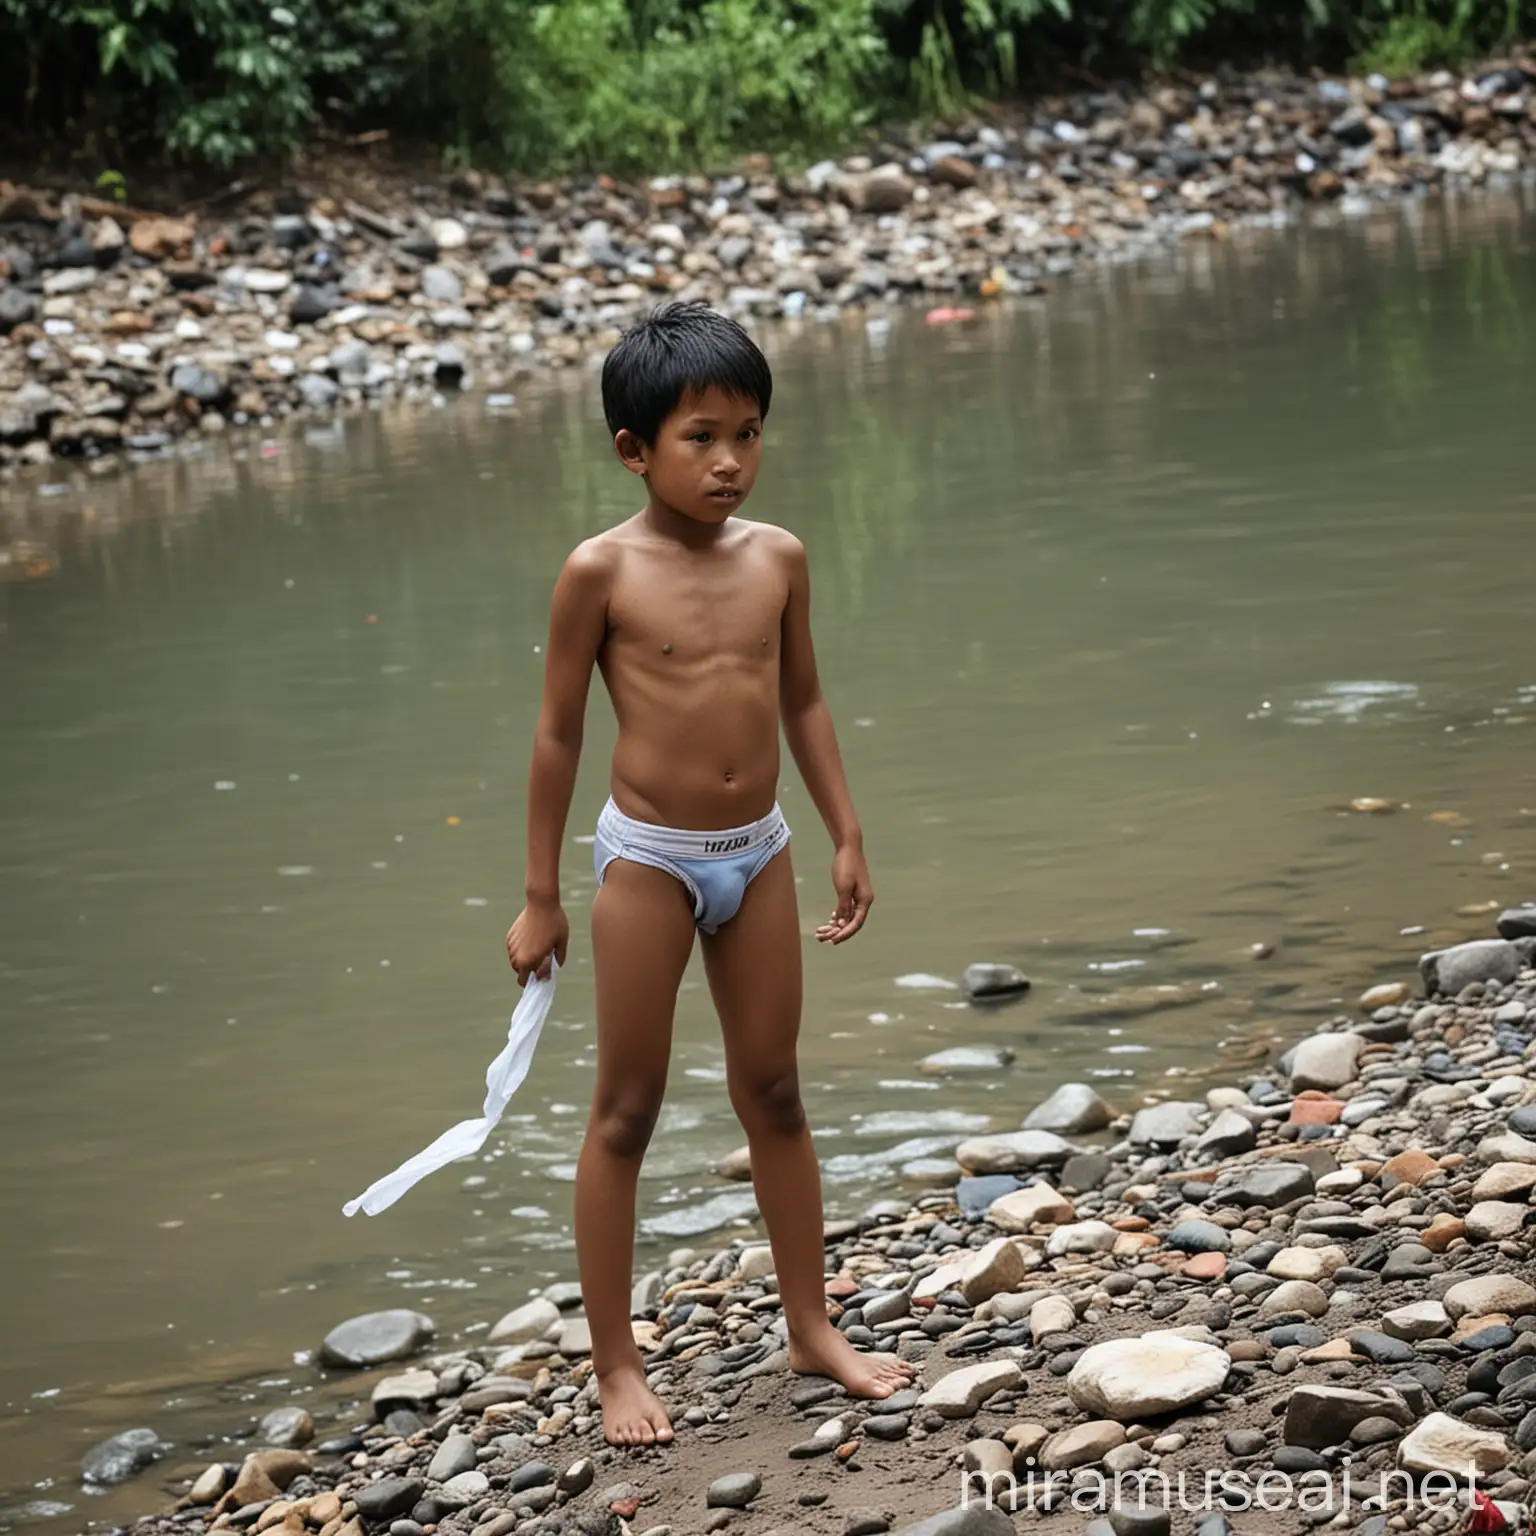 Indonesian Boy Urinating in River Candid Moment of Youthful Freedom